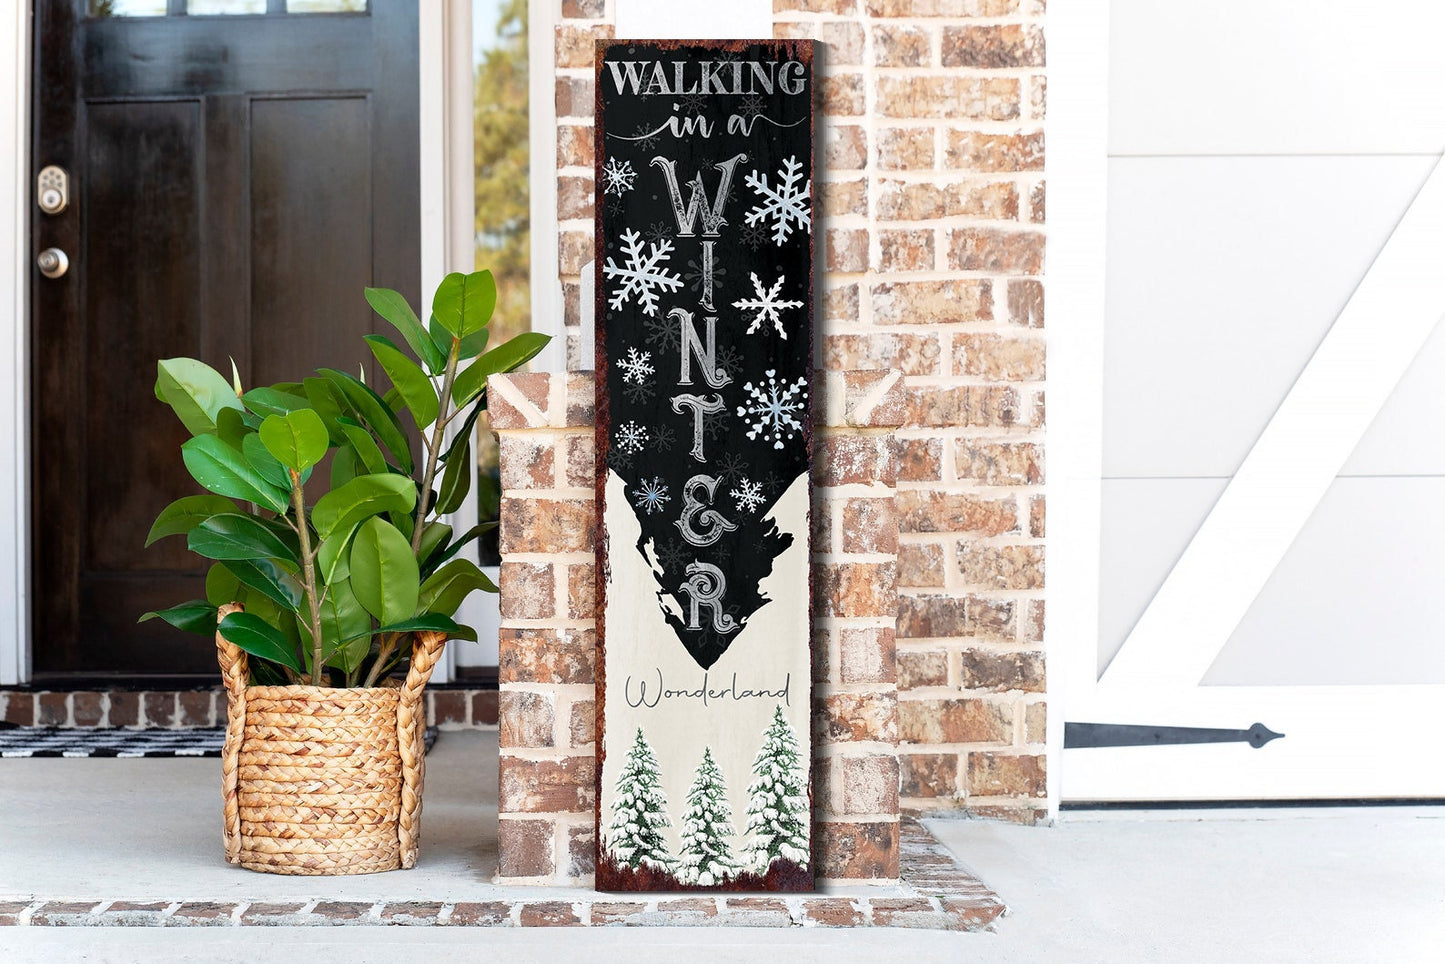 36in "Walking in a Winter Wonderland" Christmas Porch Sign - Front Porch Christmas Sign, Rustic Modern Farmhouse Entryway Board